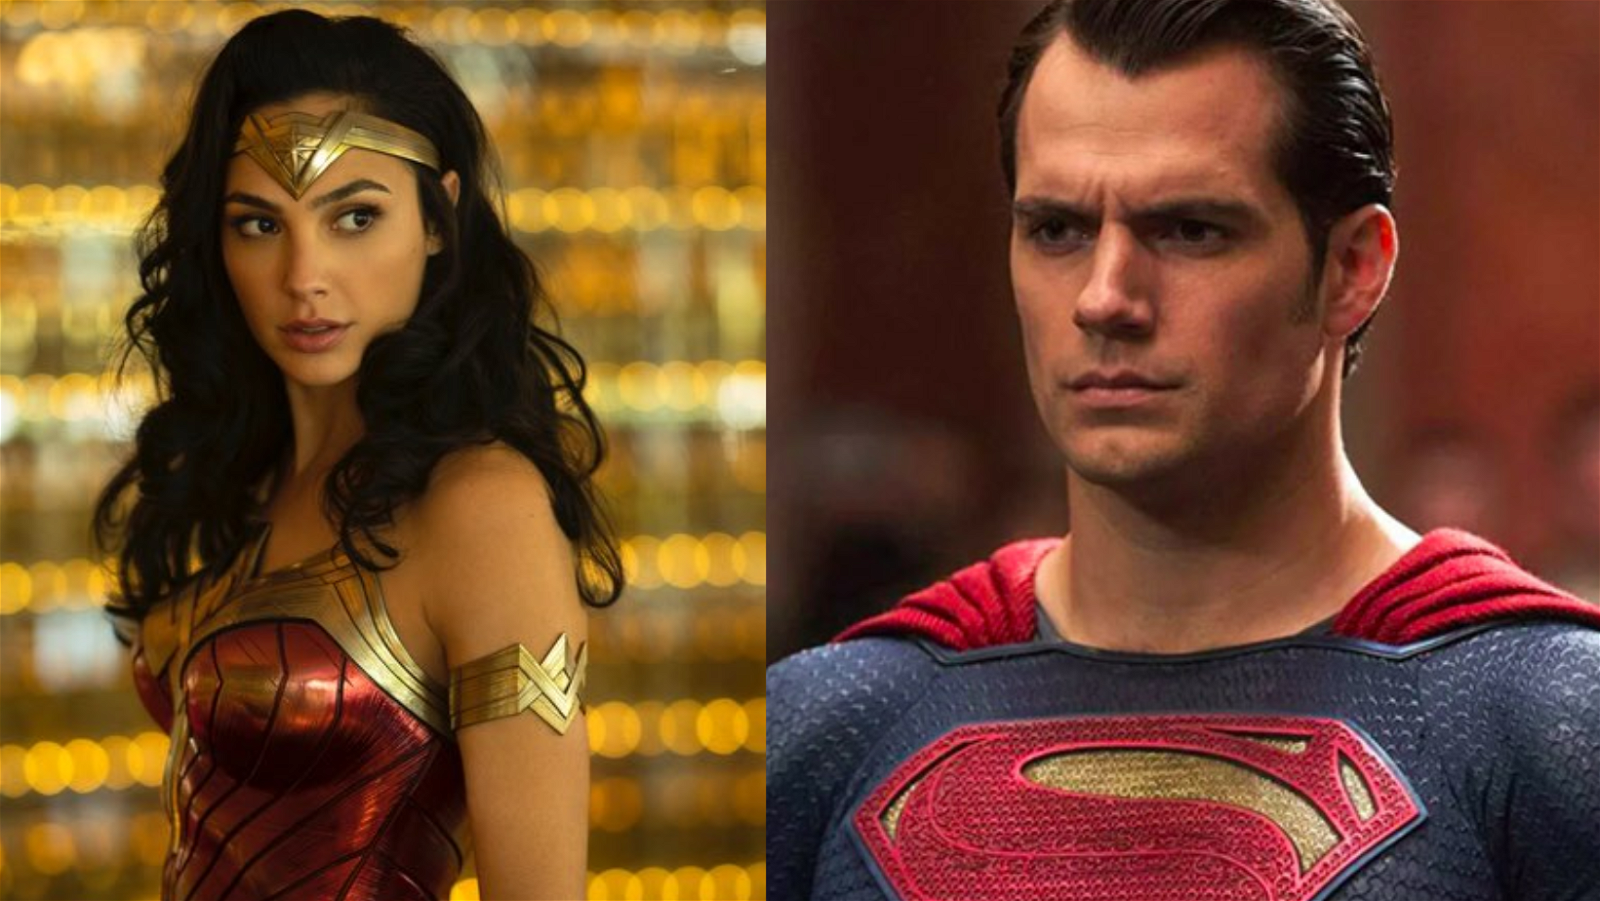 Henry Cavill and Gal Gadot: Just Forgotten or Left Behind in James Gunn’s Plan for the DCEU